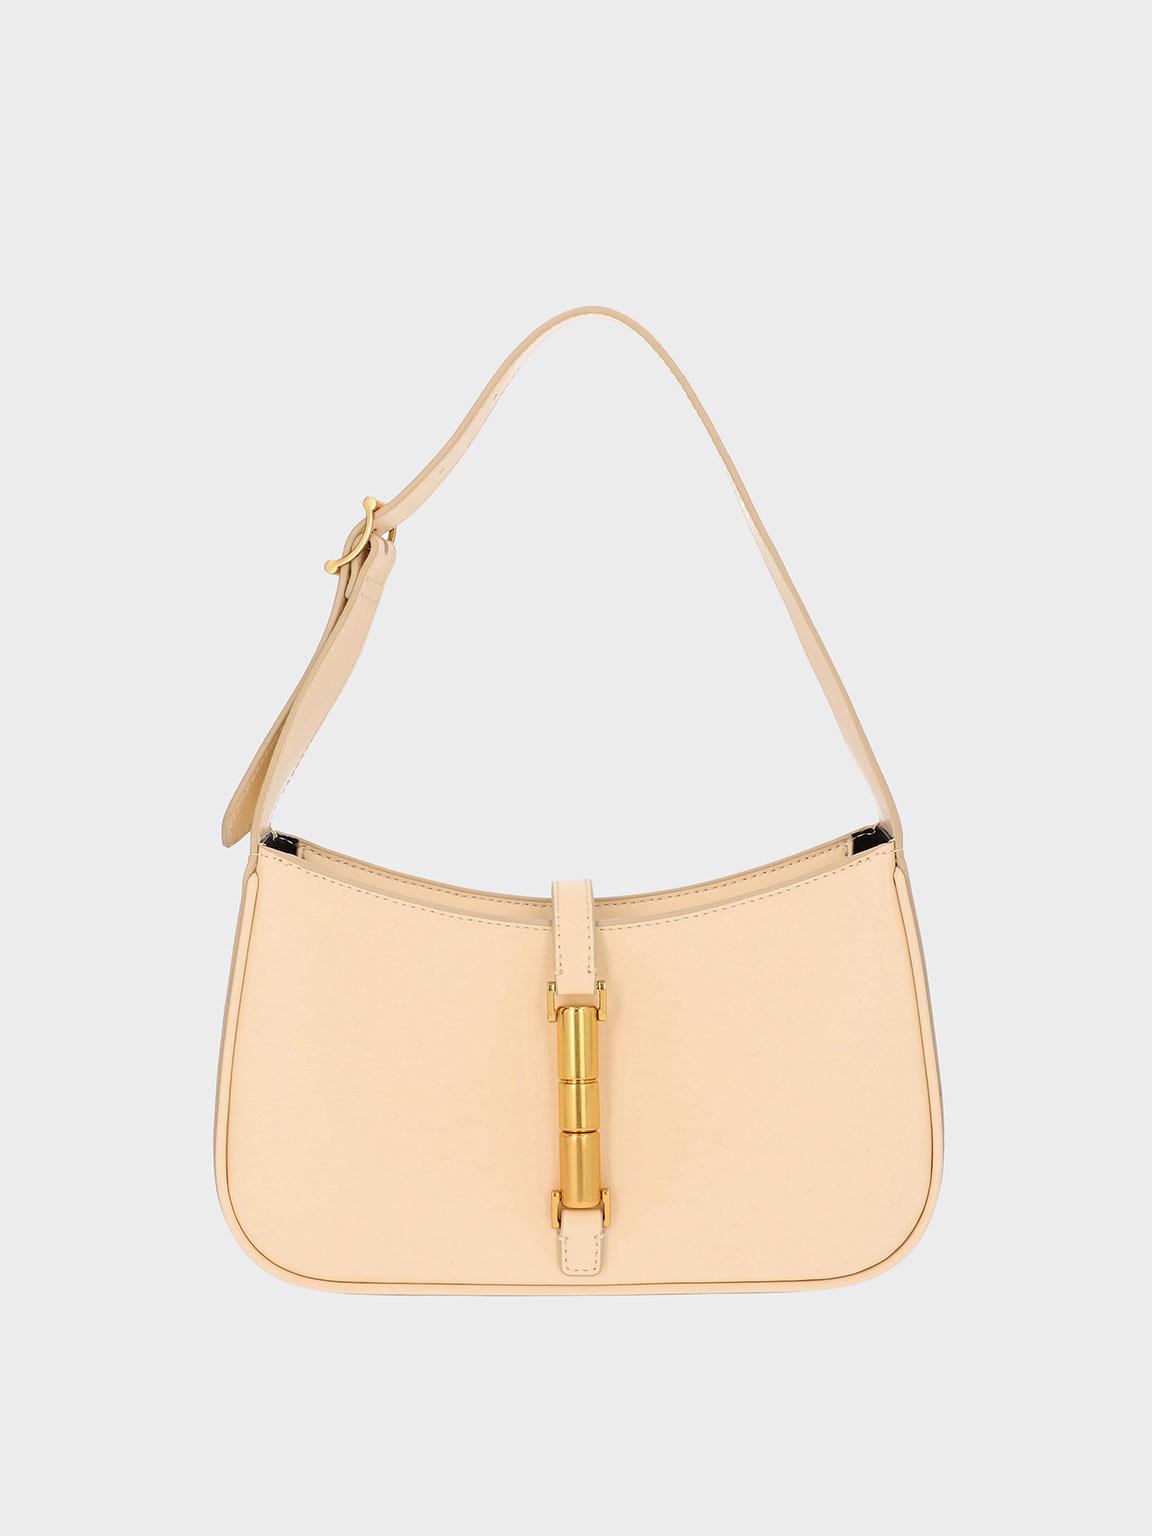 Charles & Keith Cesia Metallic Accent Shoulder Bag in Natural | Lyst